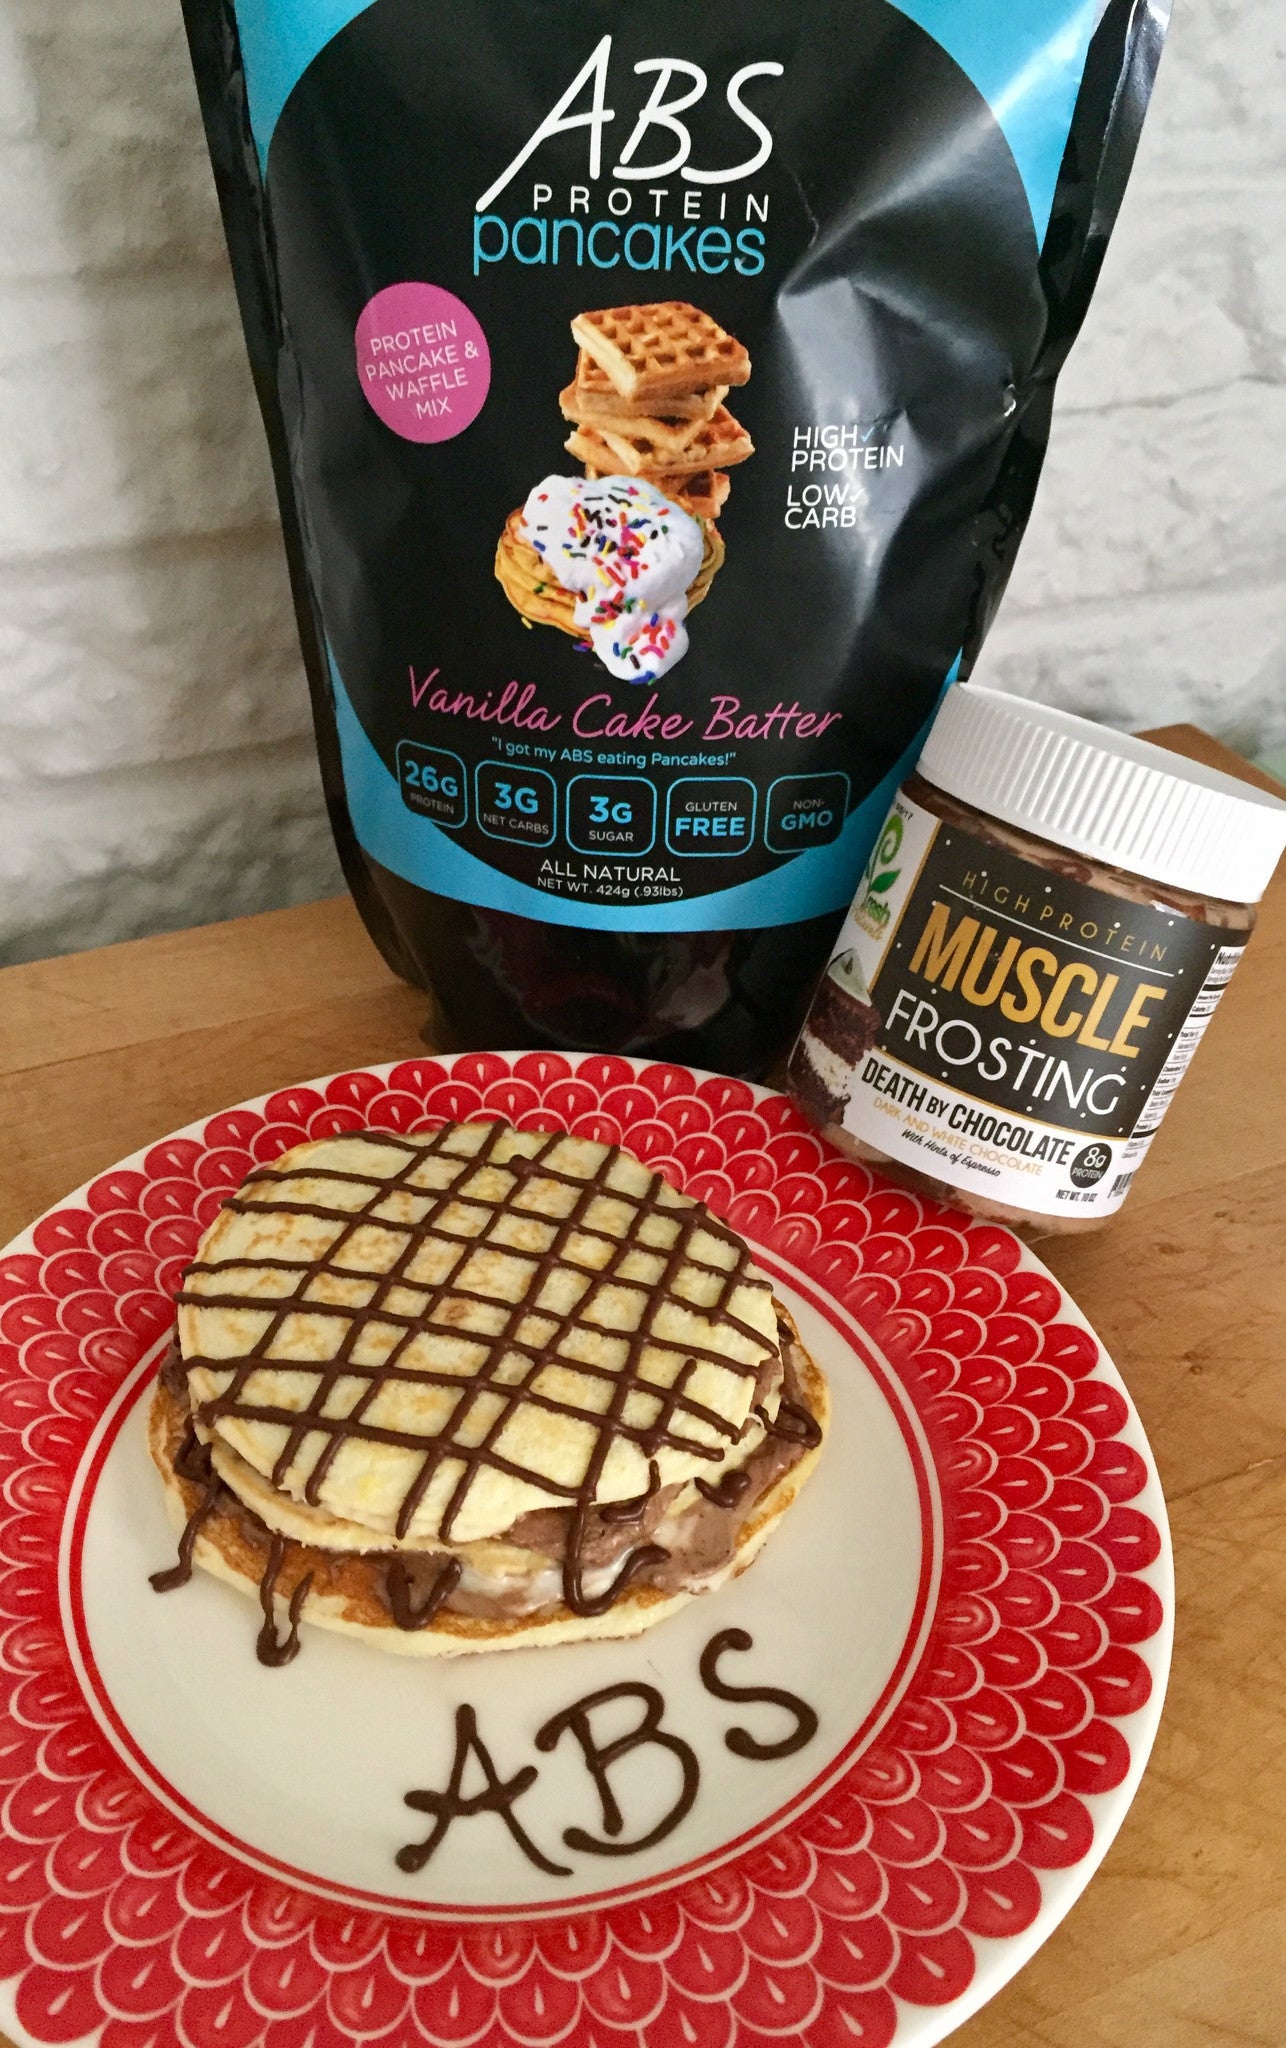 ABS Vanilla Cake Batter Pancakes with Death by Chocolate Muscle Frosting